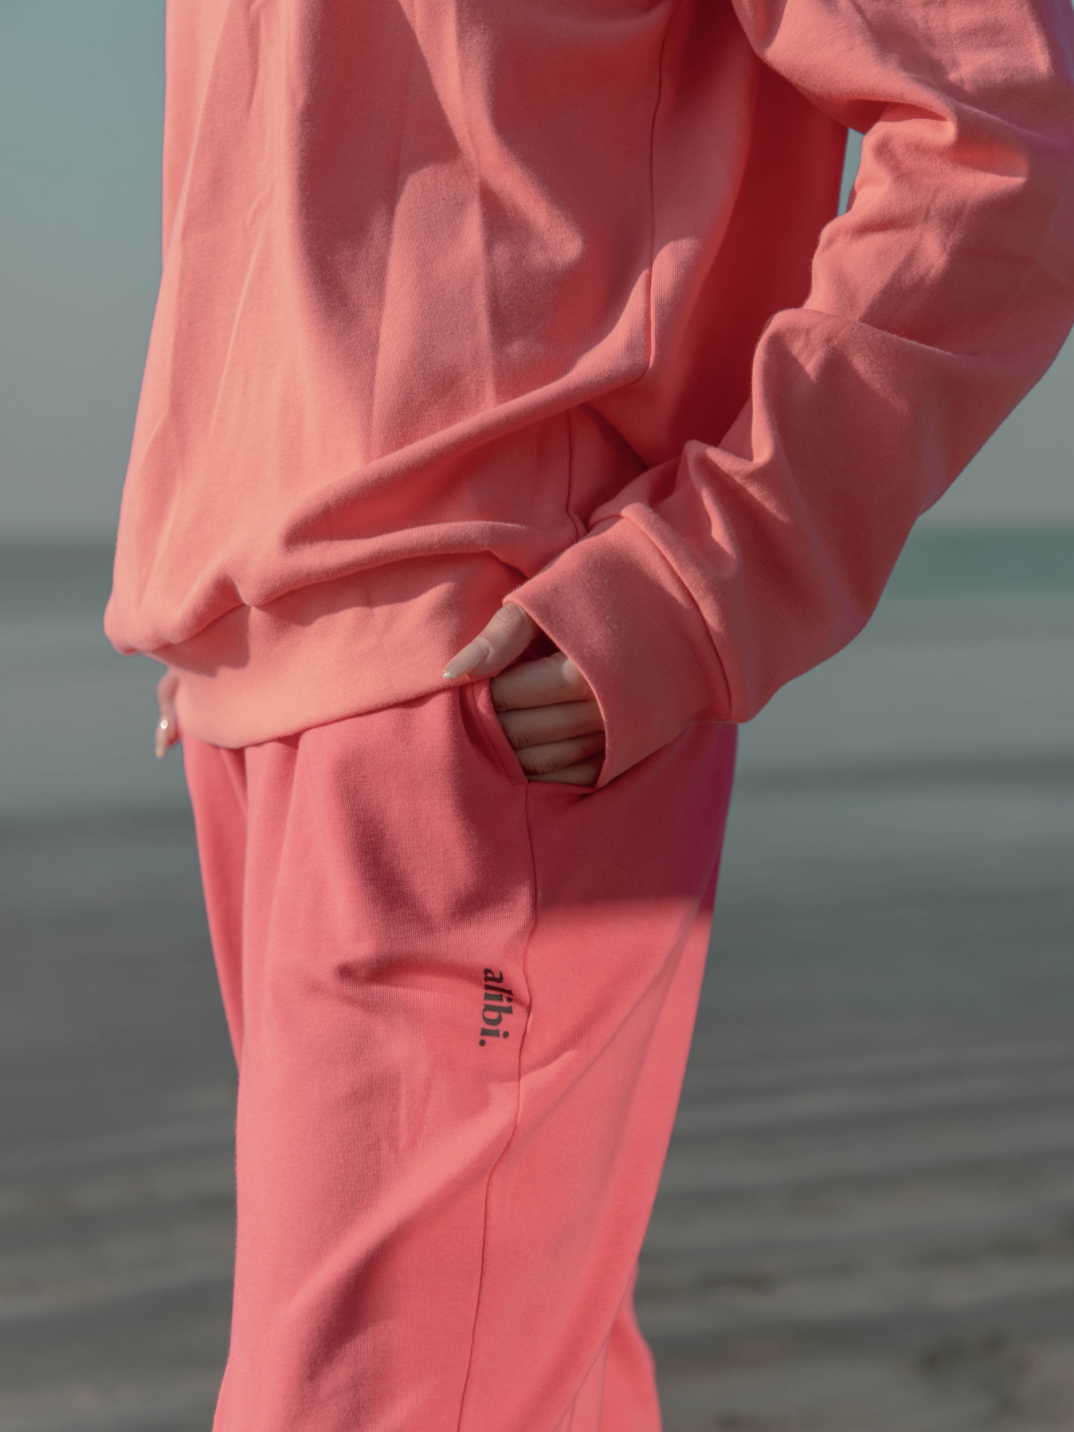 coral sweatshirt that's water-resistant, bacterially-defensive and ecologically-sustainable.